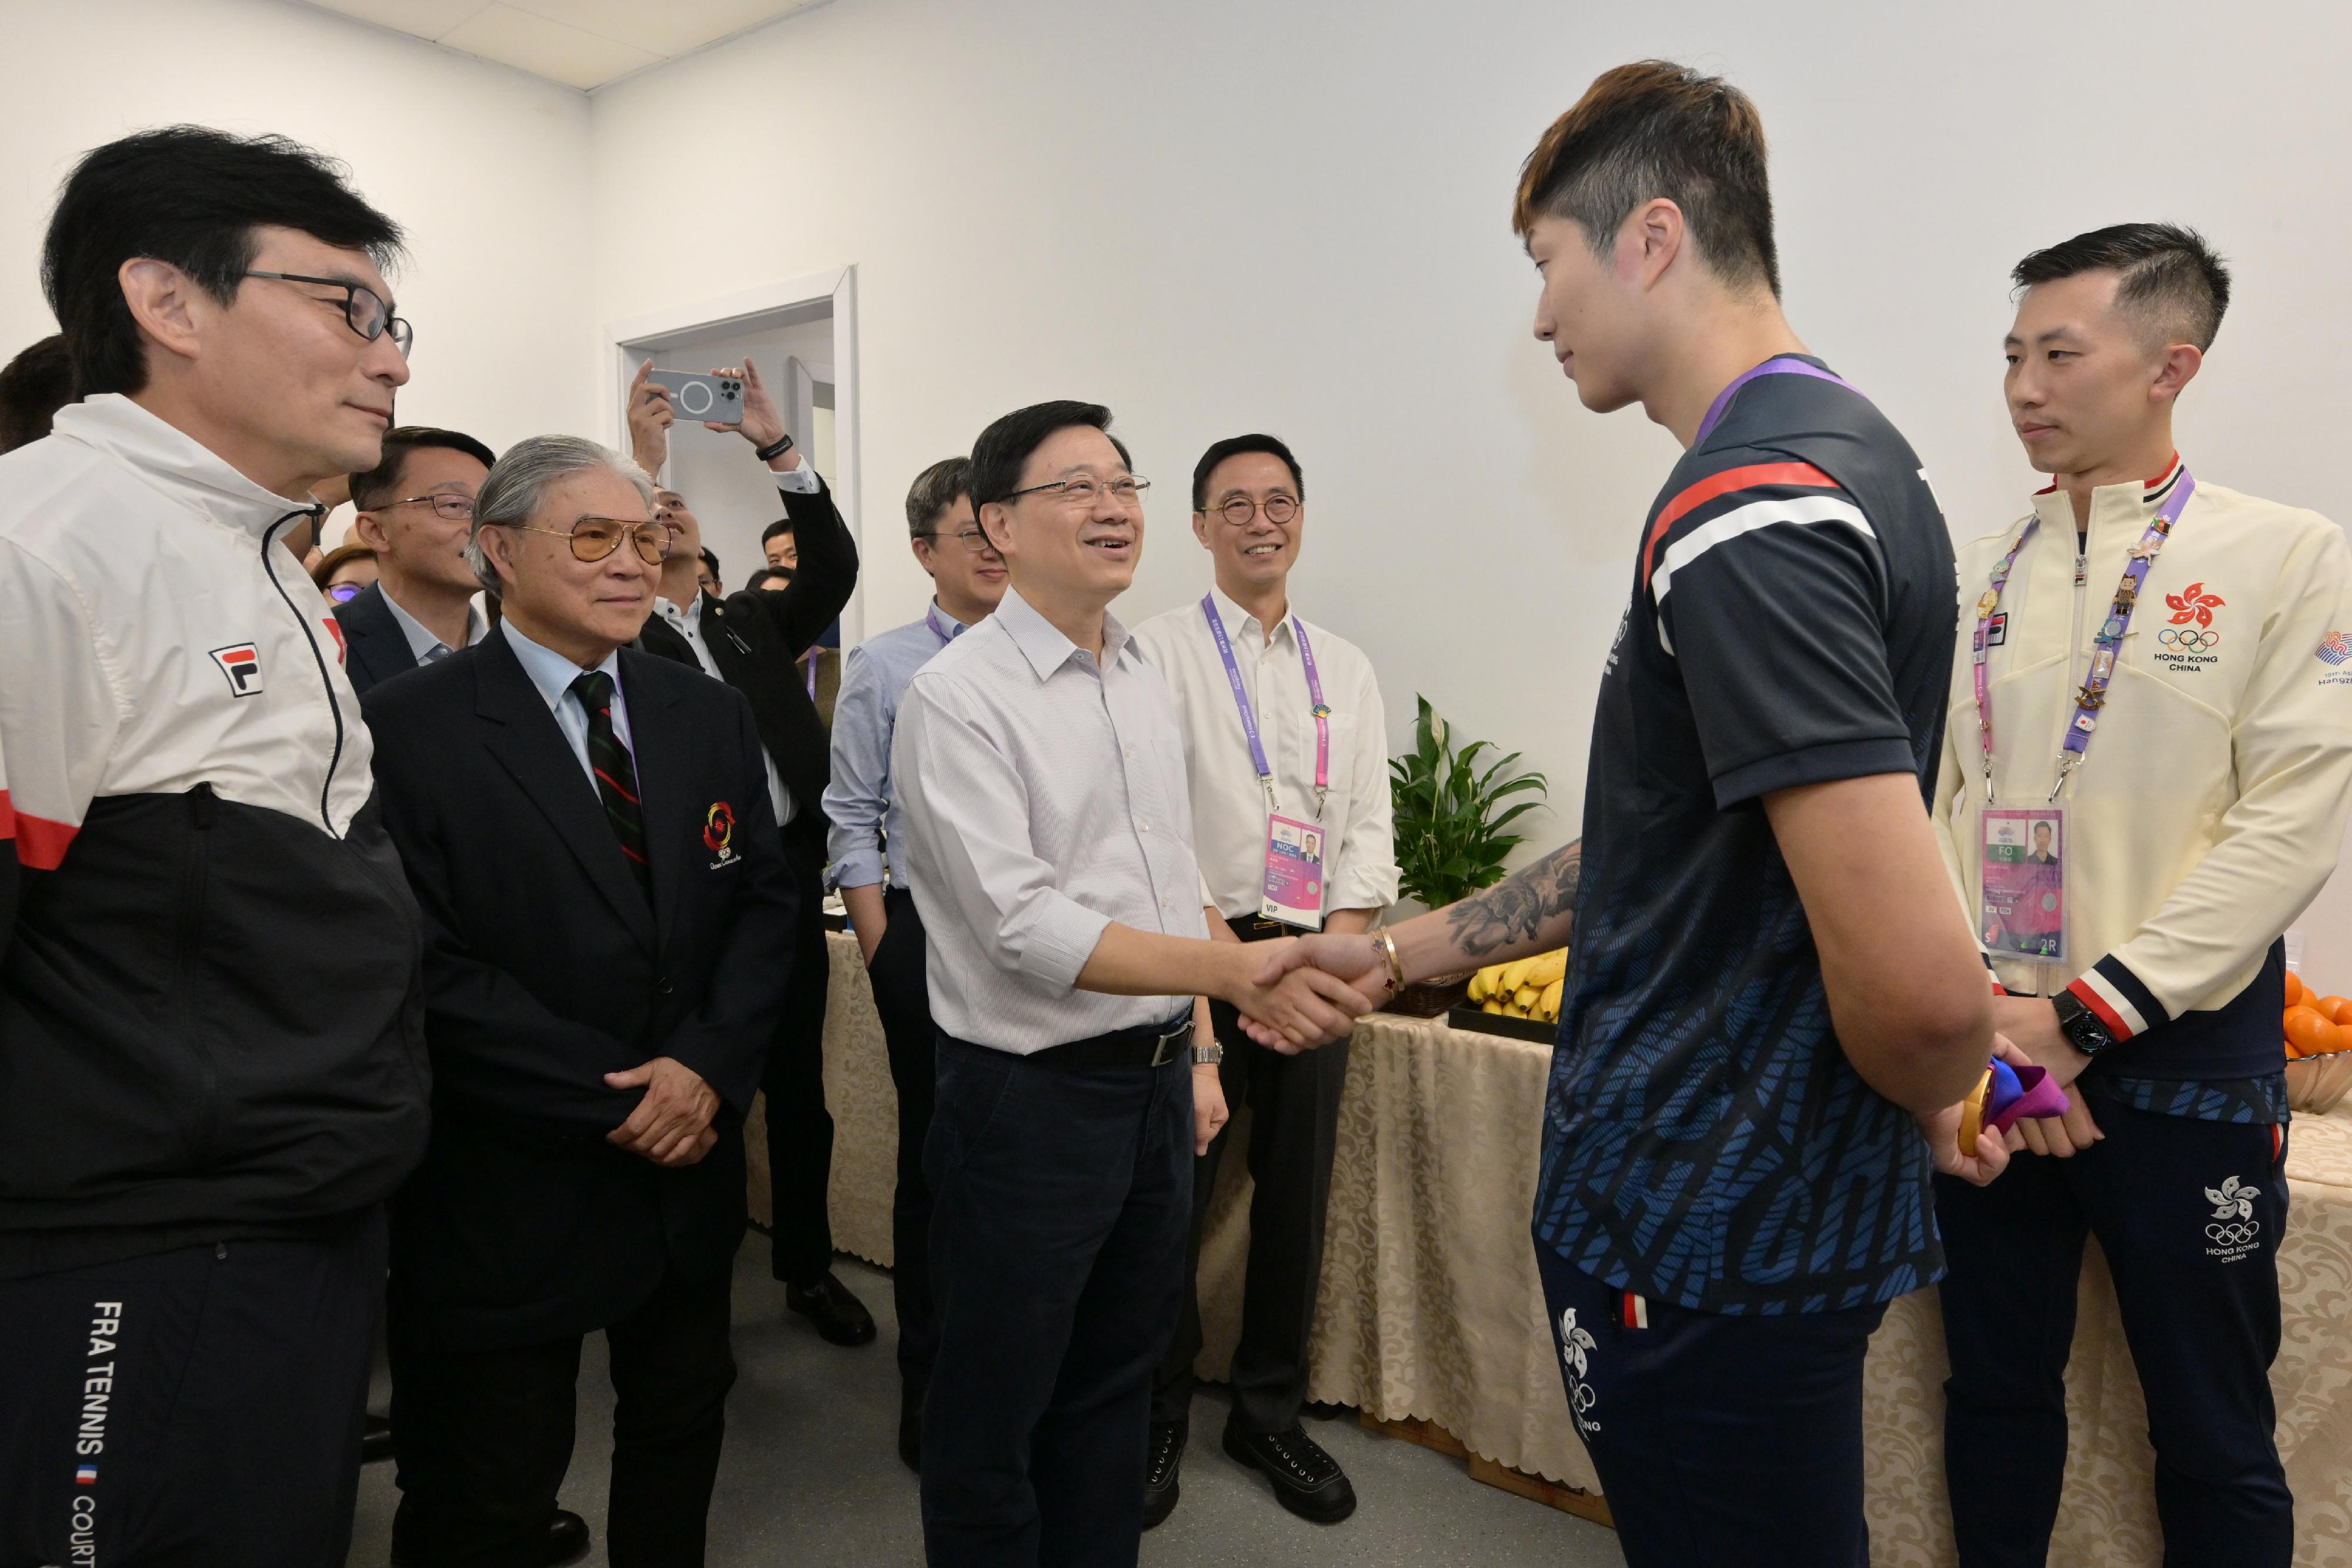 The Chief Executive, Mr John Lee, led a Hong Kong Special Administrative Region Government delegation to Hangzhou and continued his visit programme on September 24. Photo shows Mr Lee (third left) congratulating fencing athlete Cheung Ka-long on winning a gold medal in Men's Foil Individual at the 19th Asian Games Hangzhou.